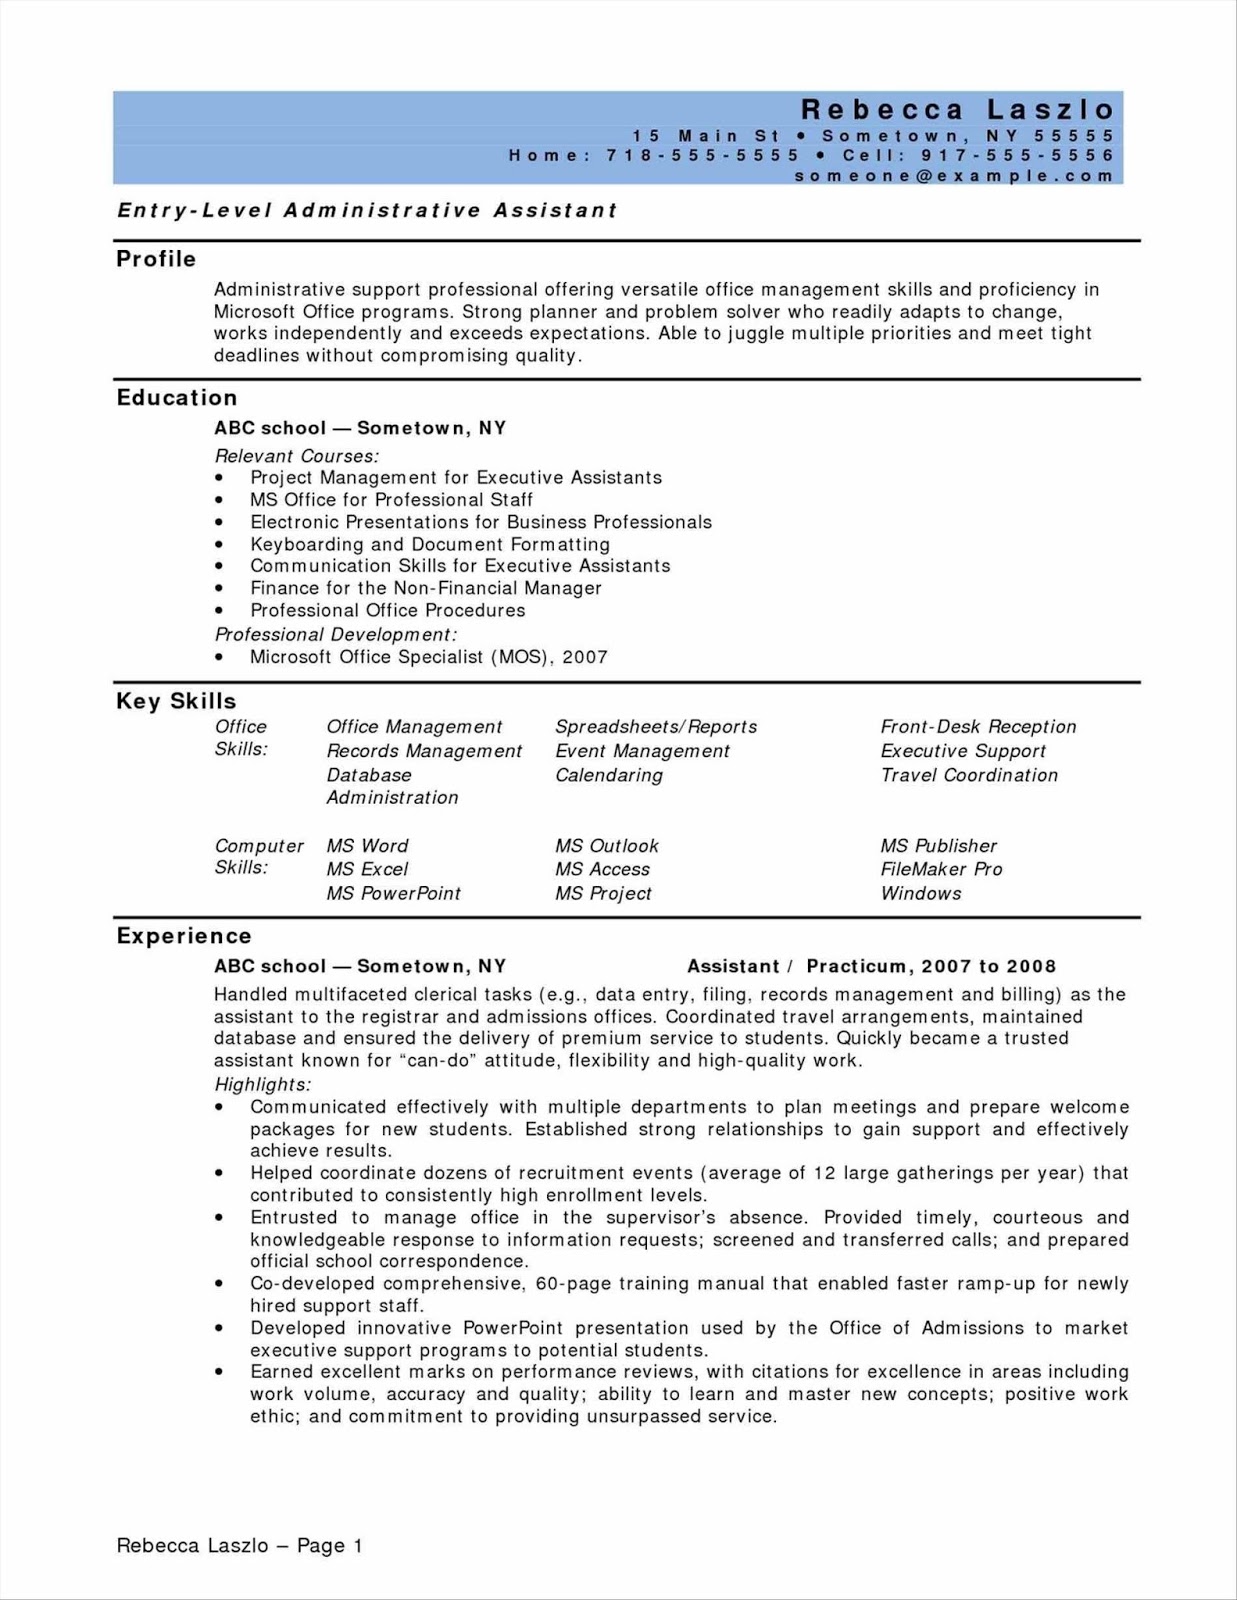 Administrative Assistant Resume Objective 2019, administrative assistant resume objective examples, administrative assistant resume objective samples 2020